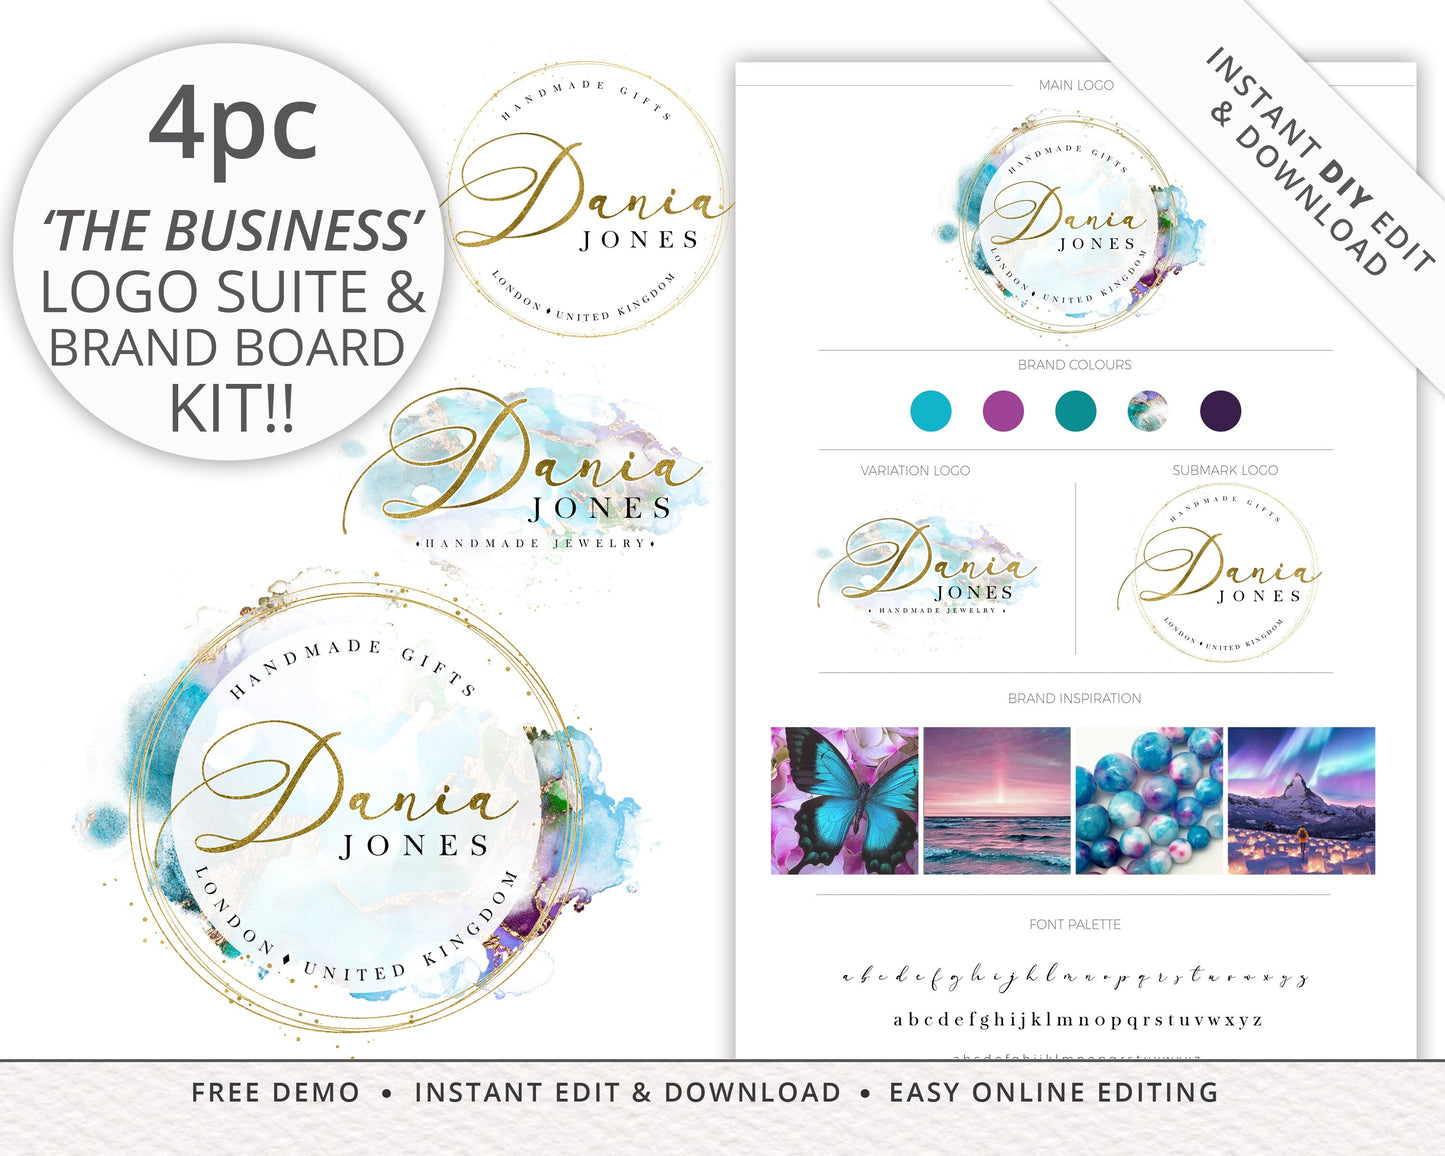 Editable 4pc Watercolor Marble Logos Suite & Brand Board / Style Tile Branding Package | Professional Kit | Premade Instant Edit - DJ-001